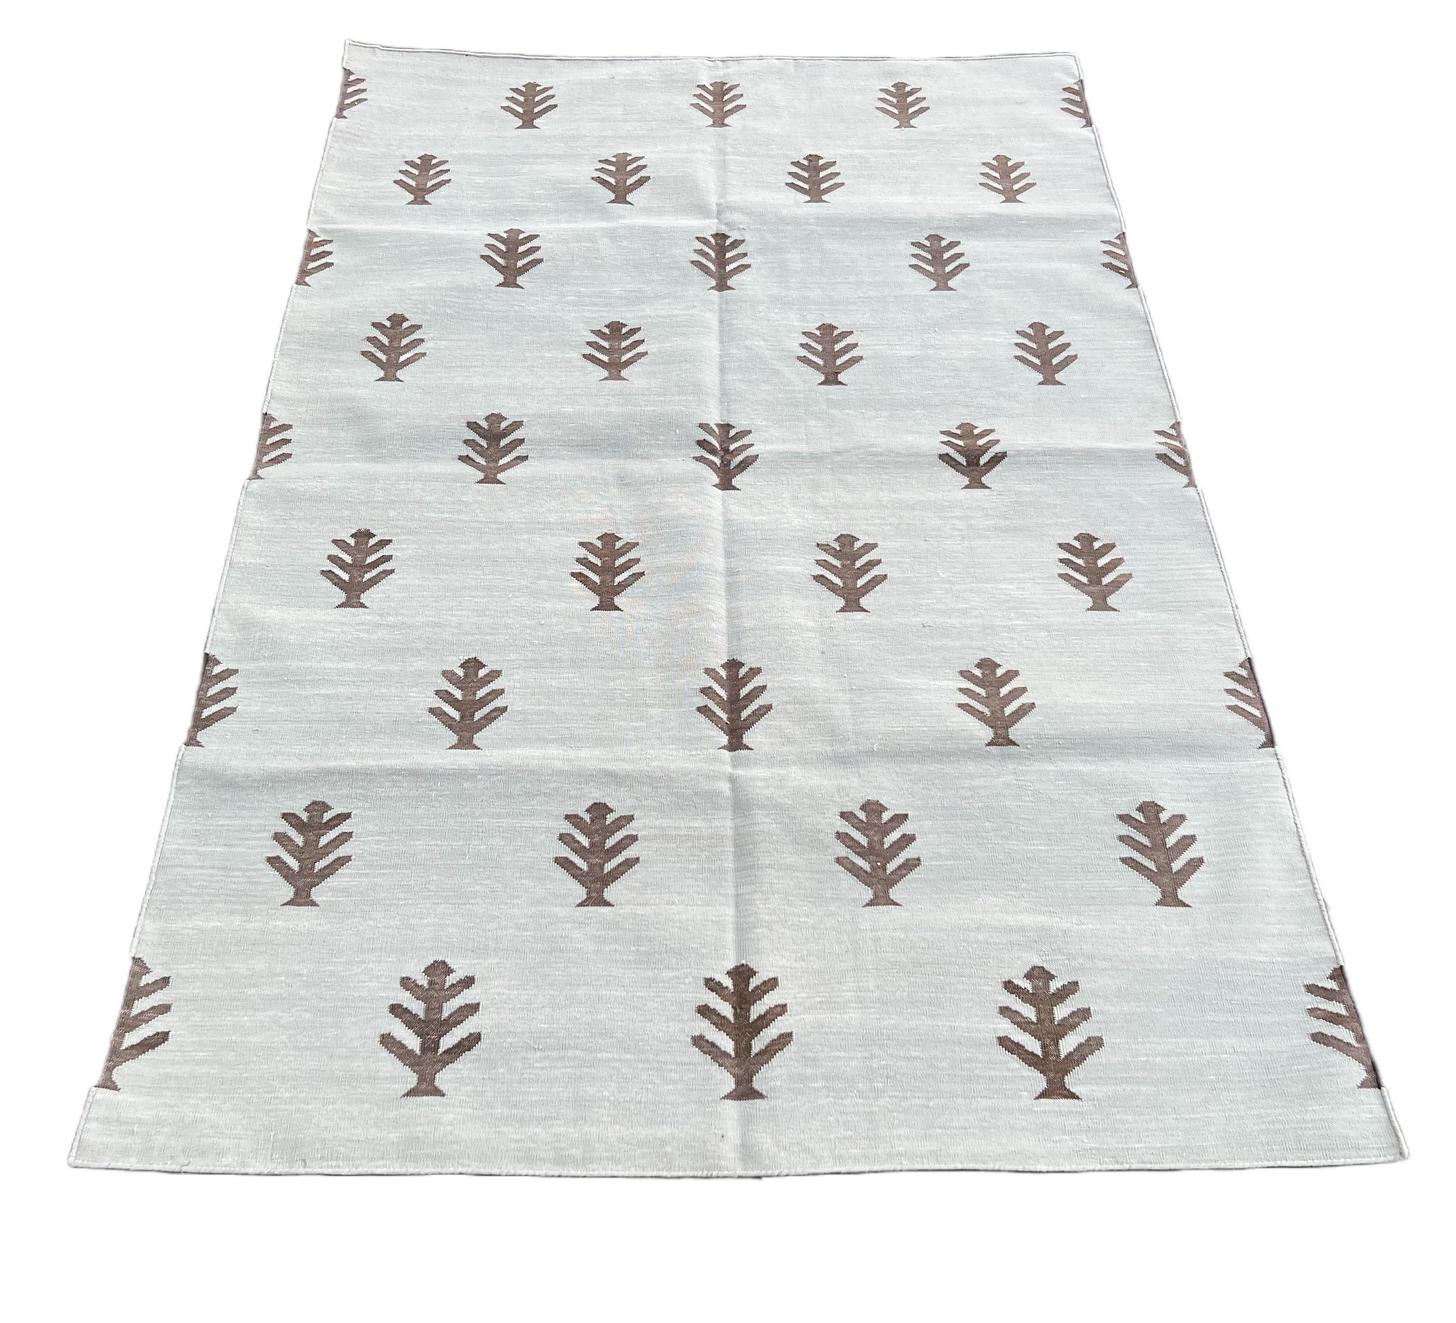 Handmade Cotton Area Flat Weave Rug, Grey & Brown Tree Patterned Indian Dhurrie In New Condition For Sale In Jaipur, IN